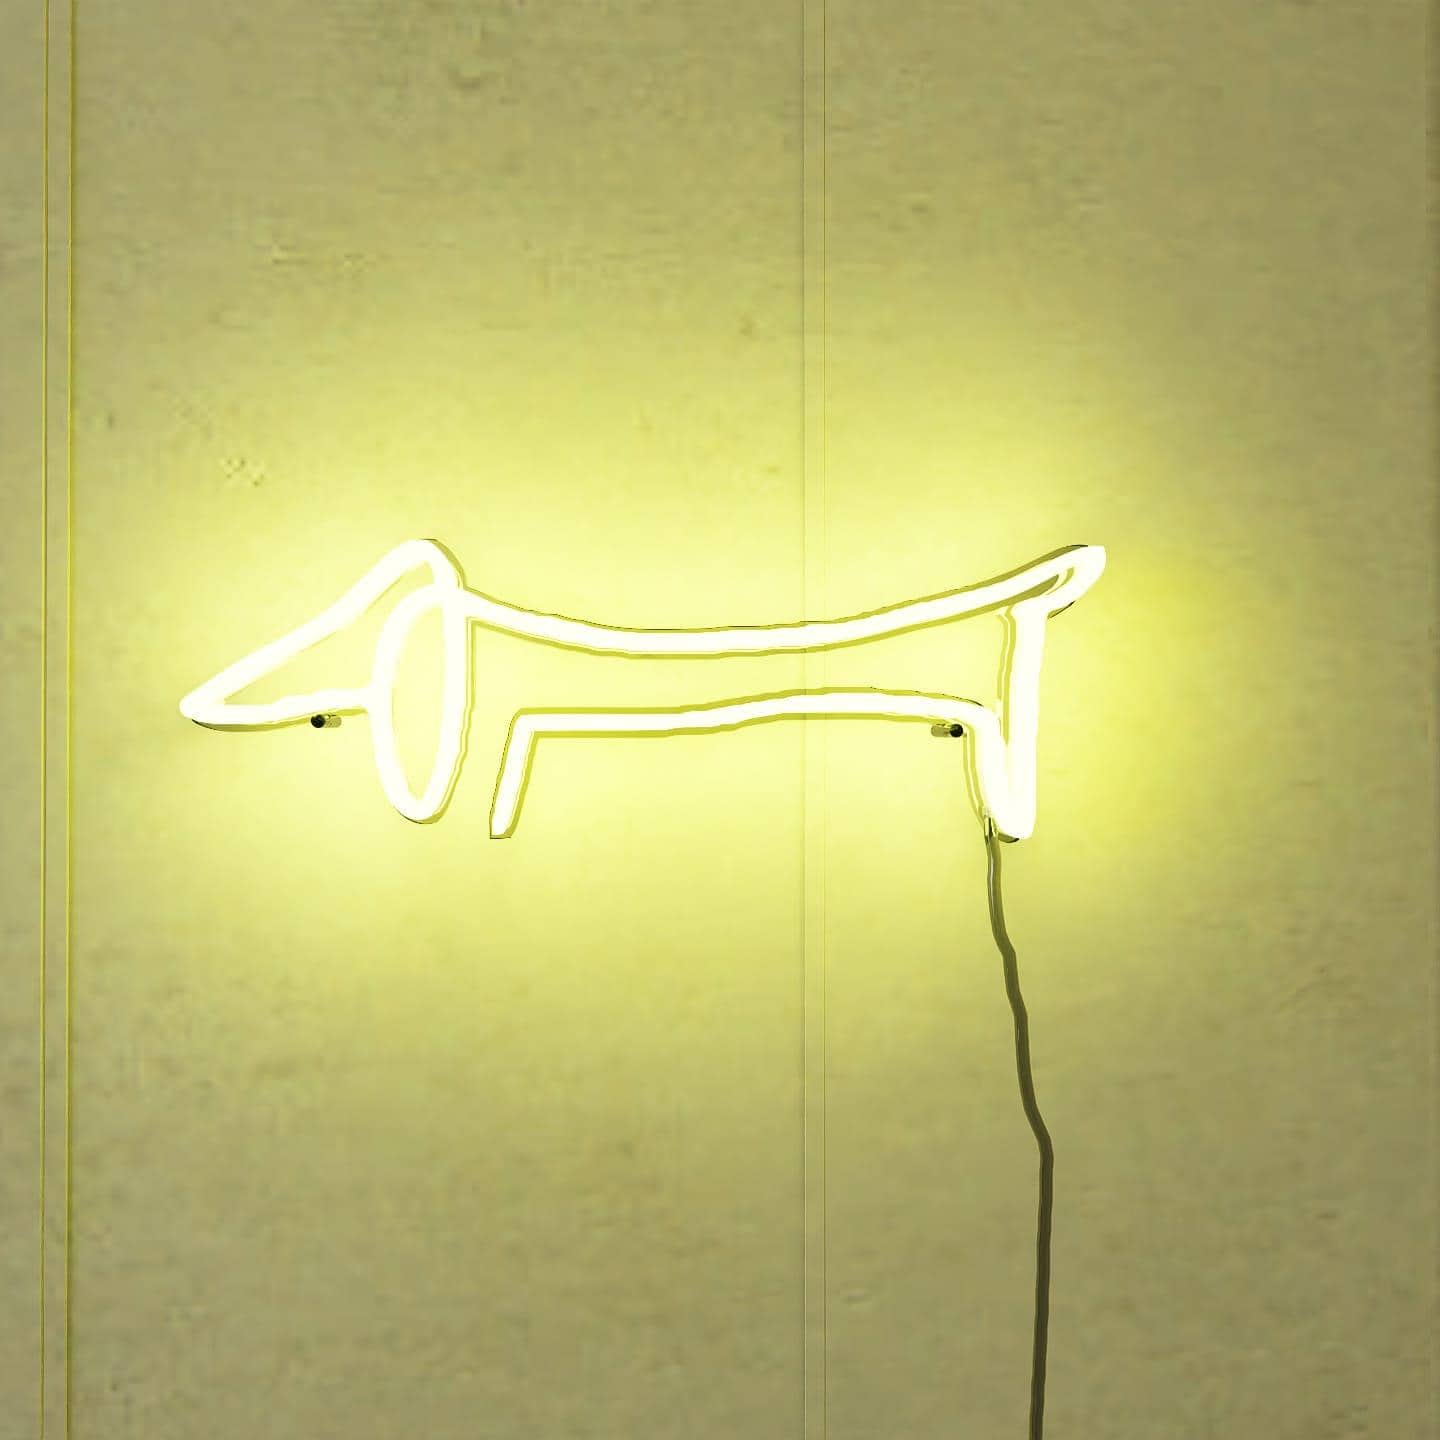 picasso-sketch-of-dachshund-hanging-on-wall-display-illuminated-at-night-golden